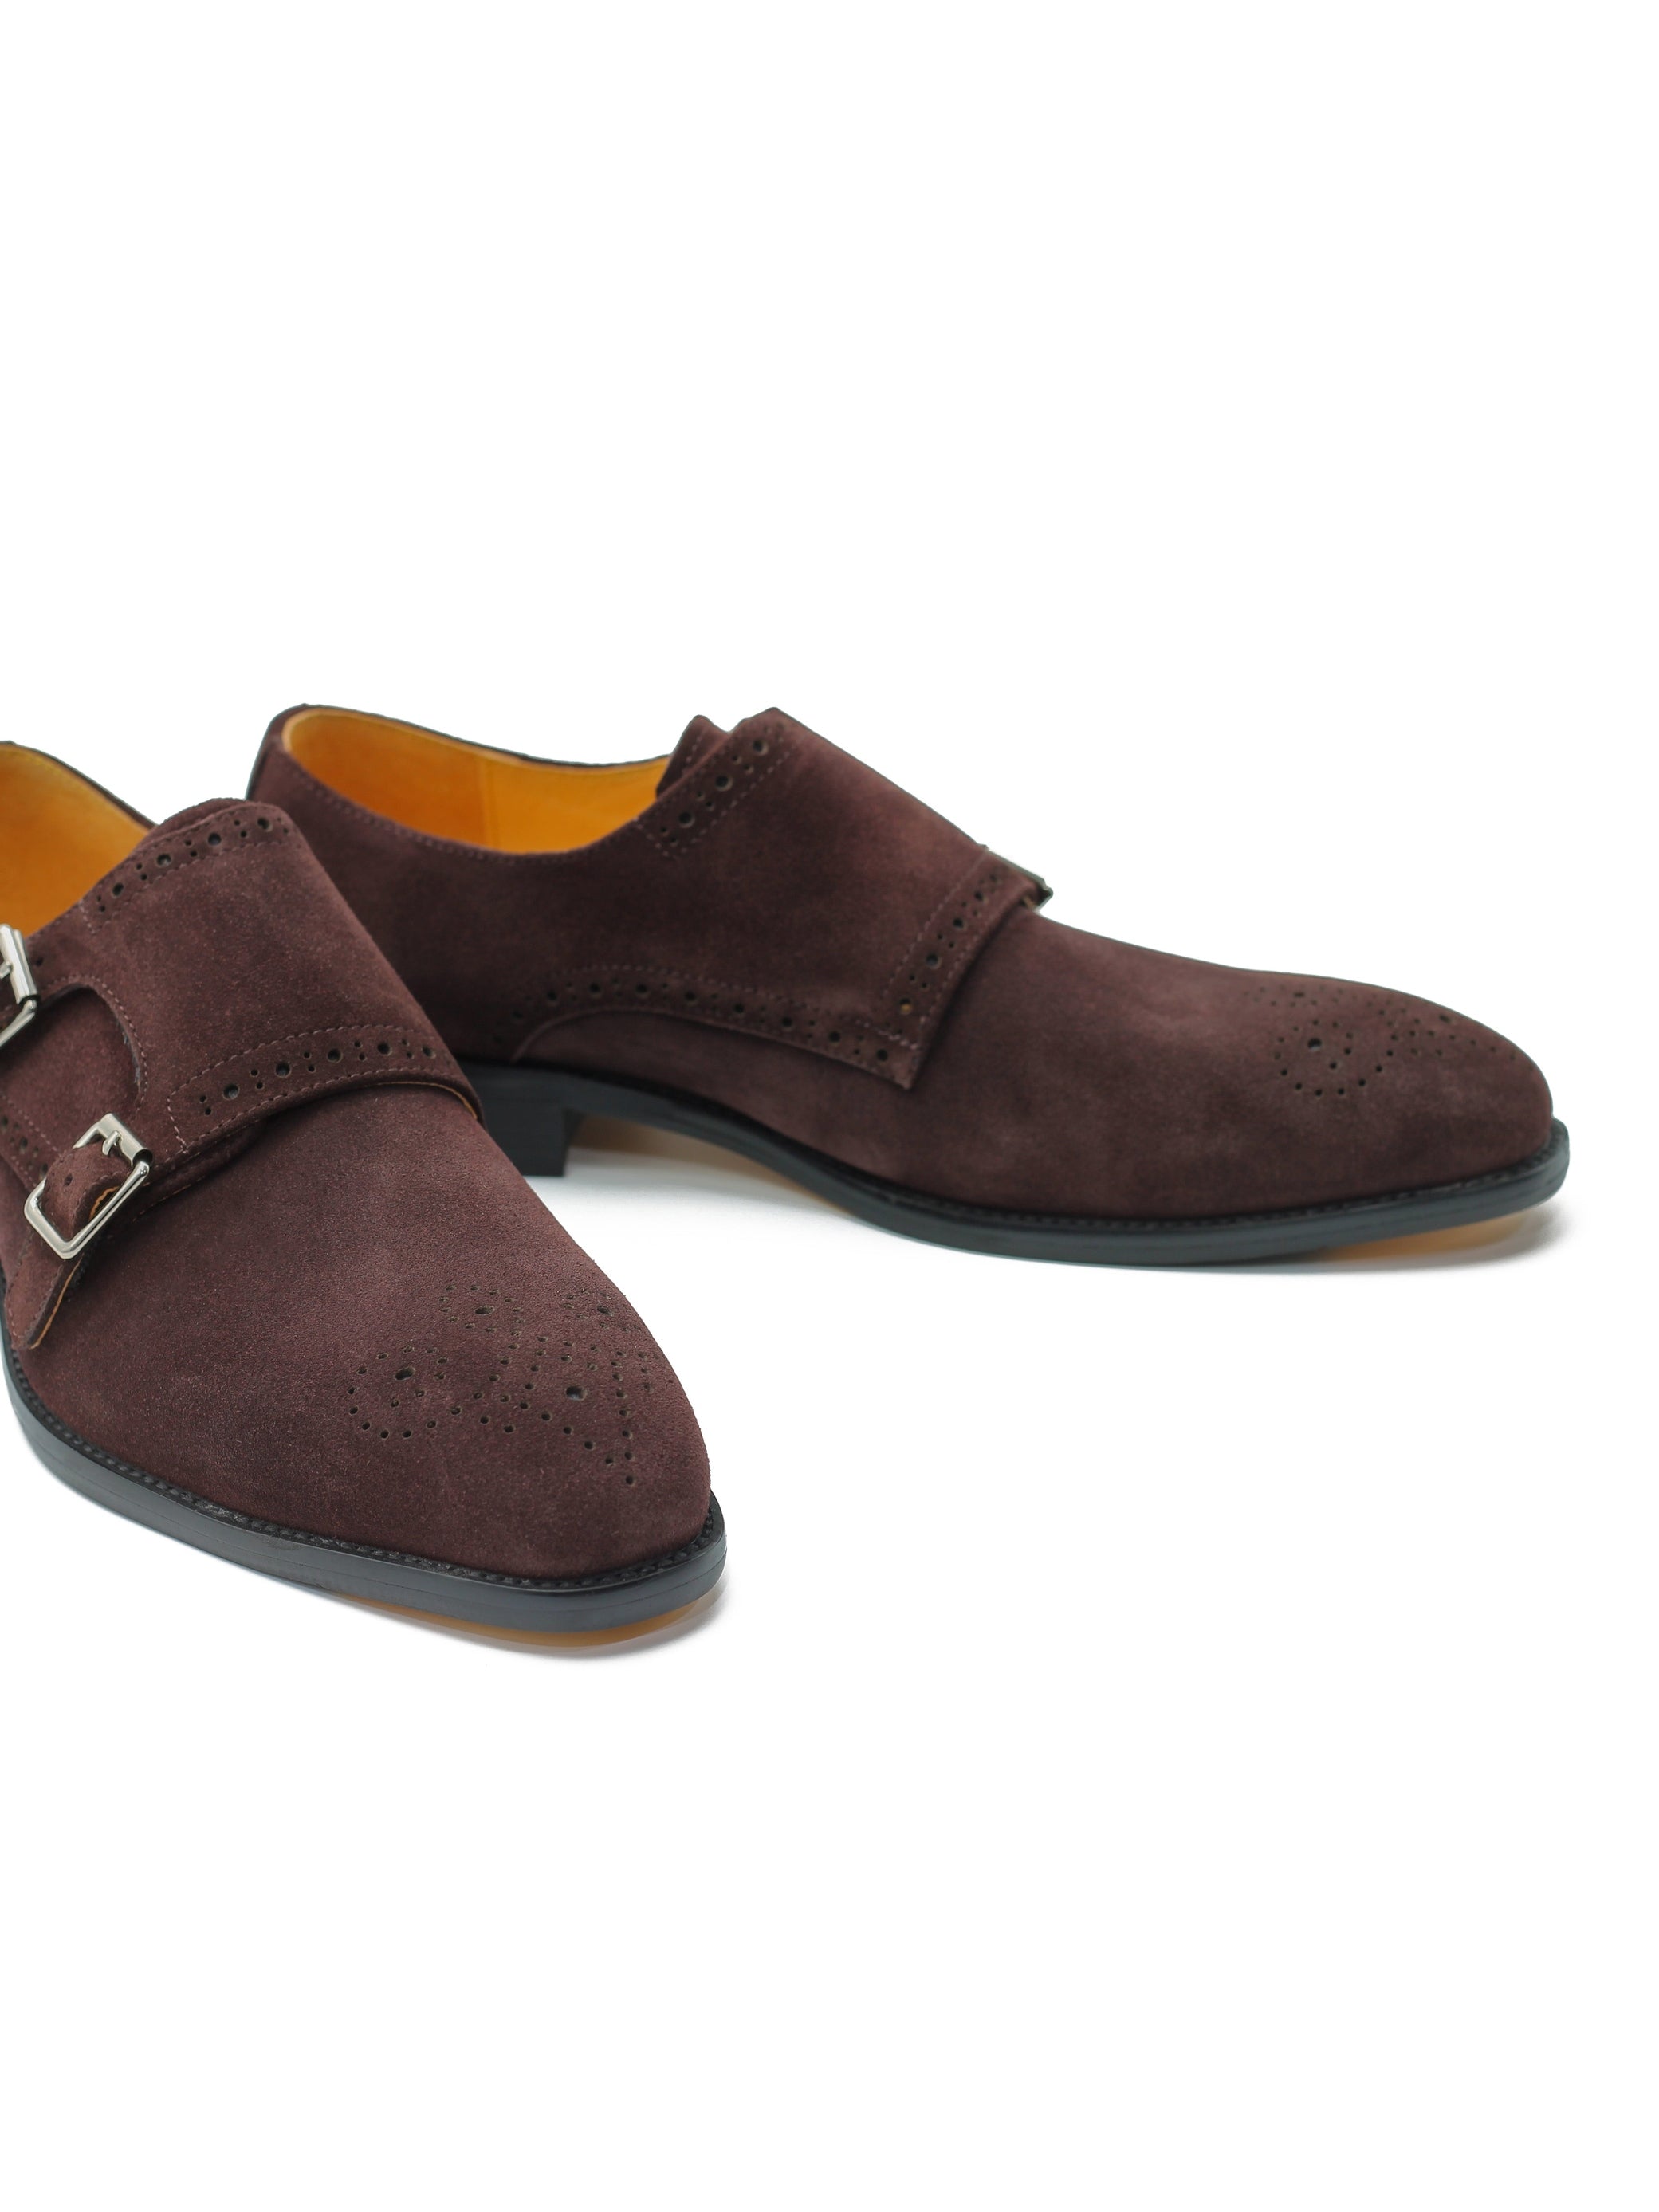 BROWN SUEDE DOUBLE MONK SHOES